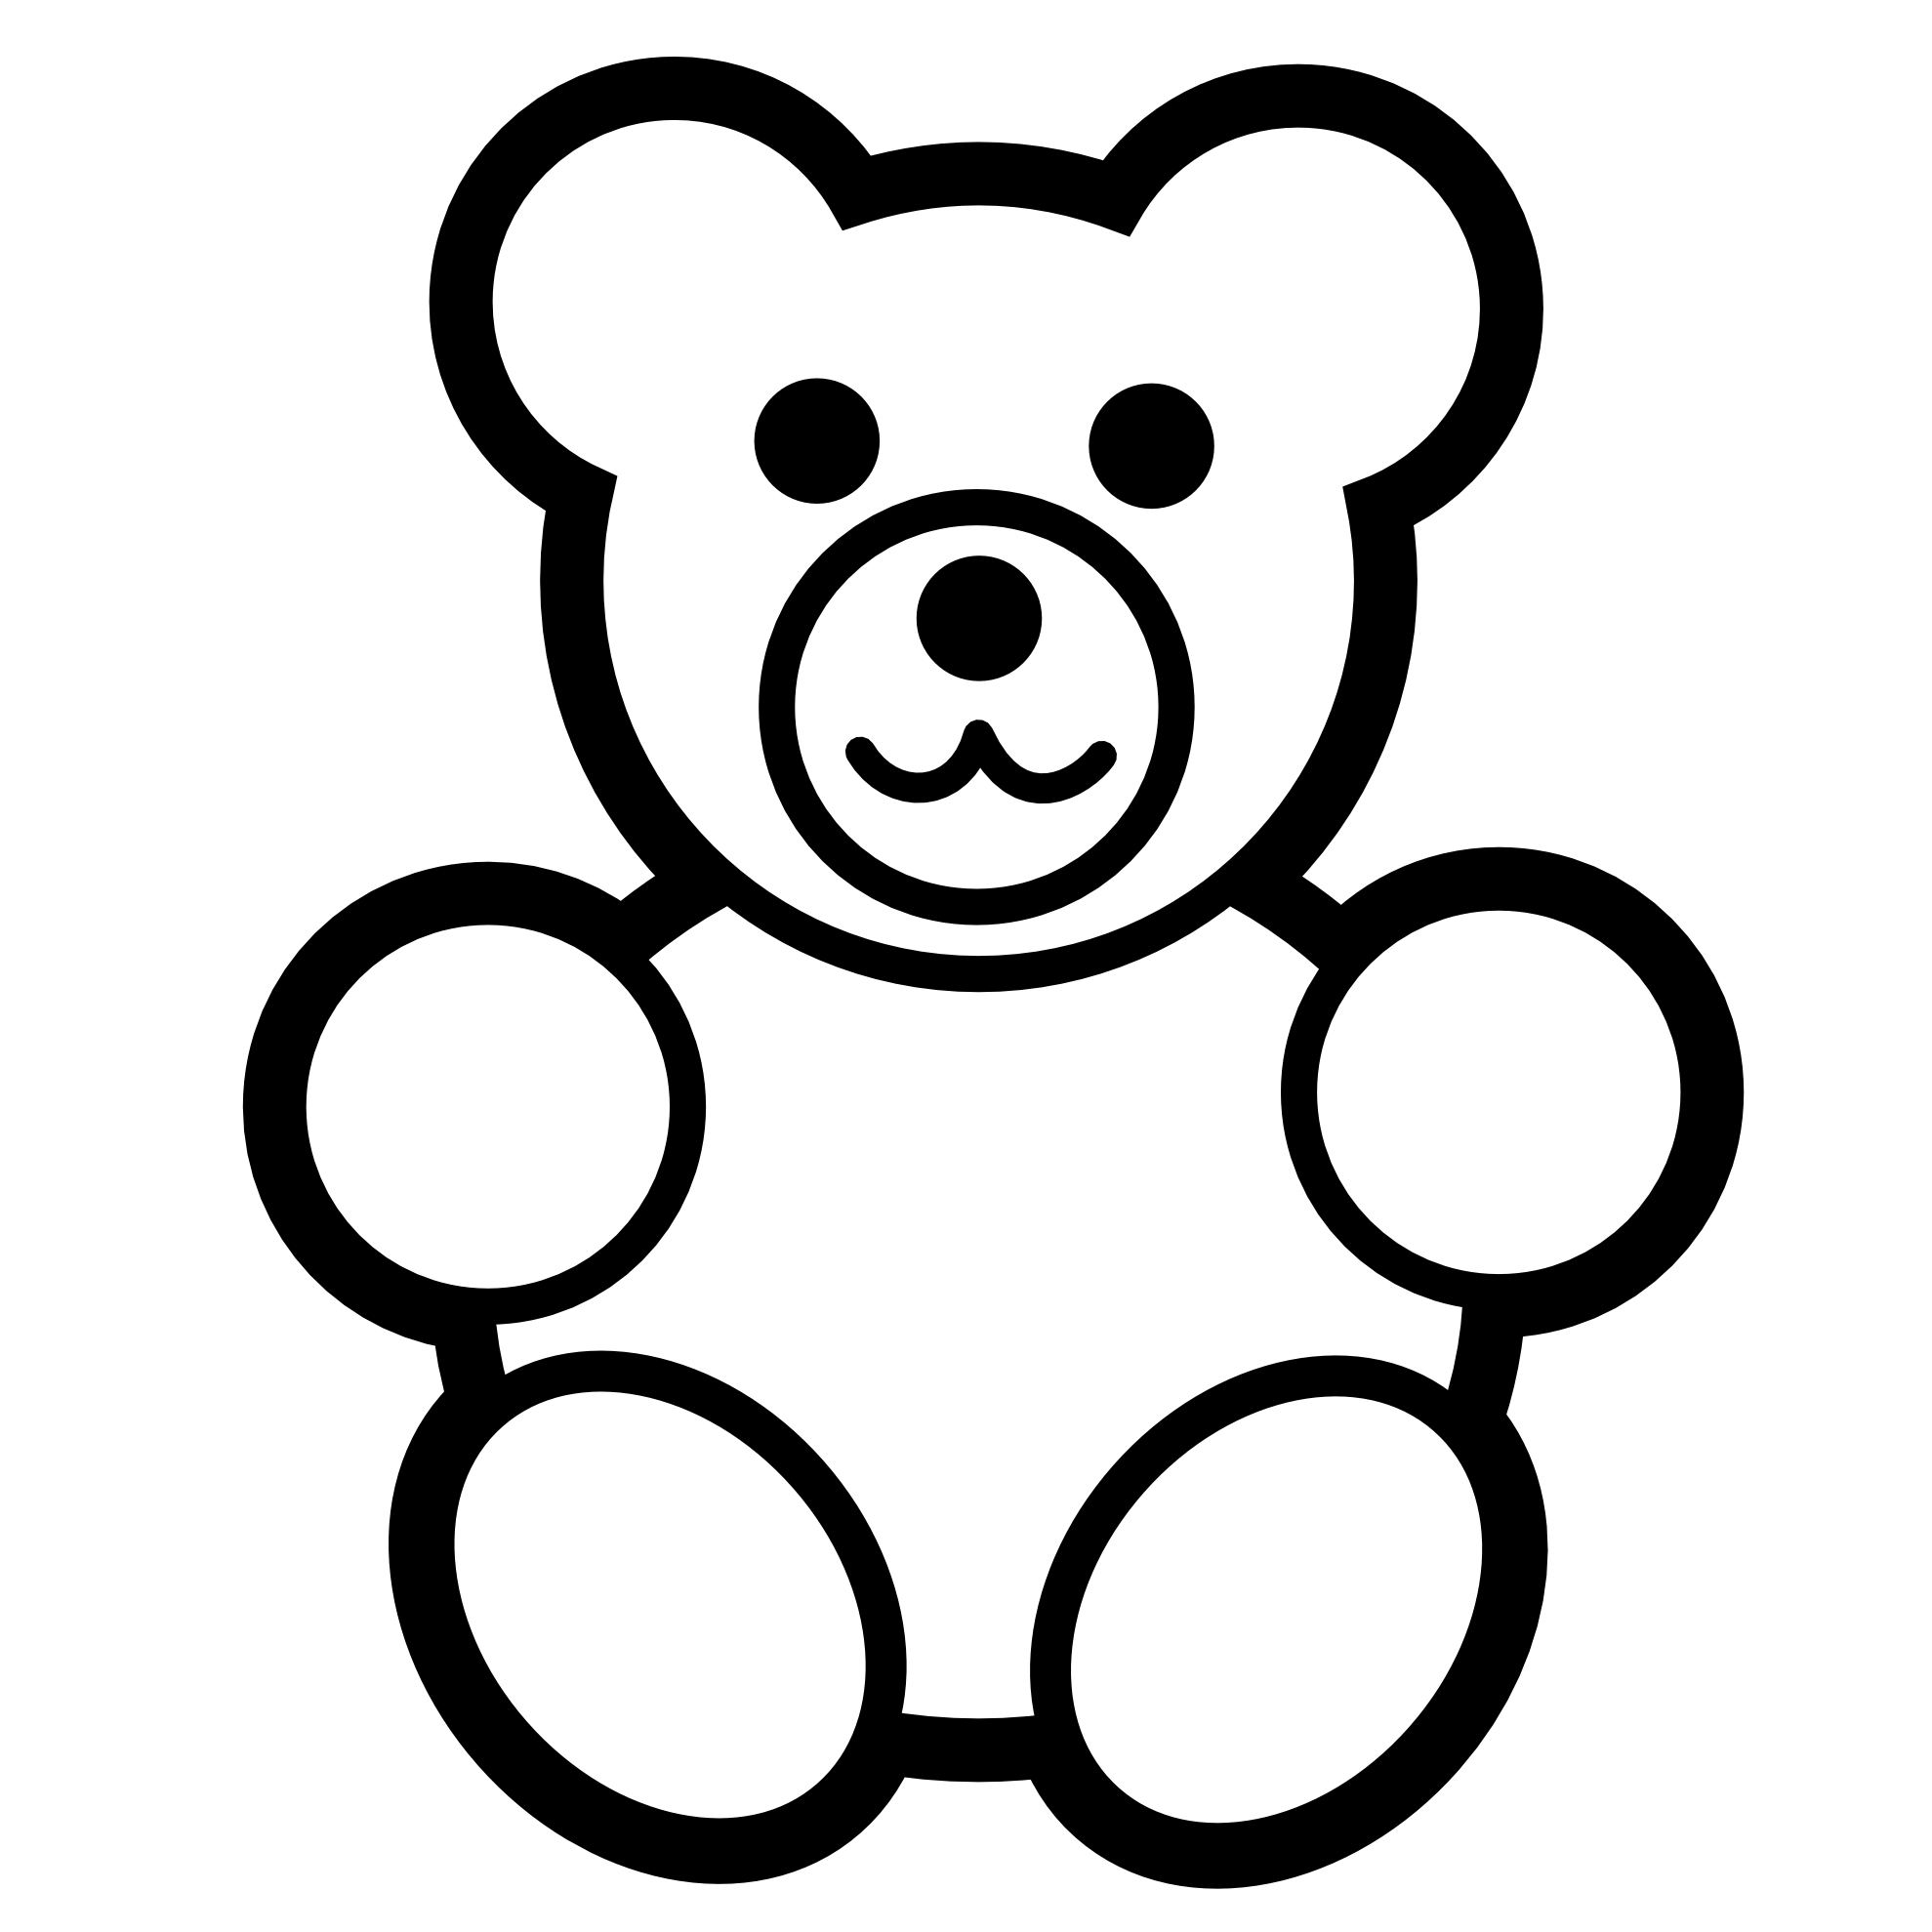 Free Teddy Bear Outline Download Free Teddy Bear Outline png images